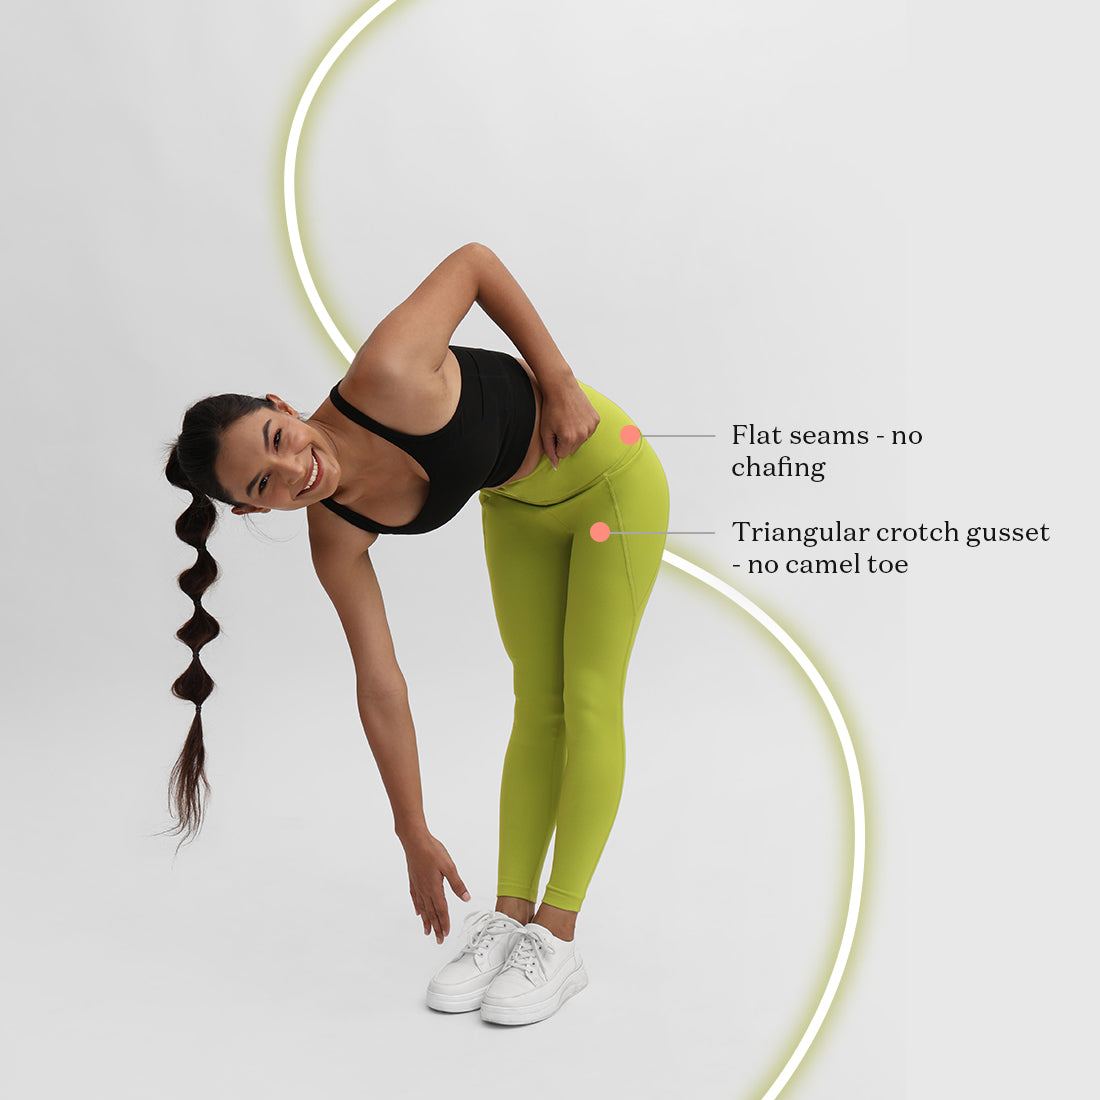 High-Waisted Neon Ankle Length Leggings with 3 Pockets